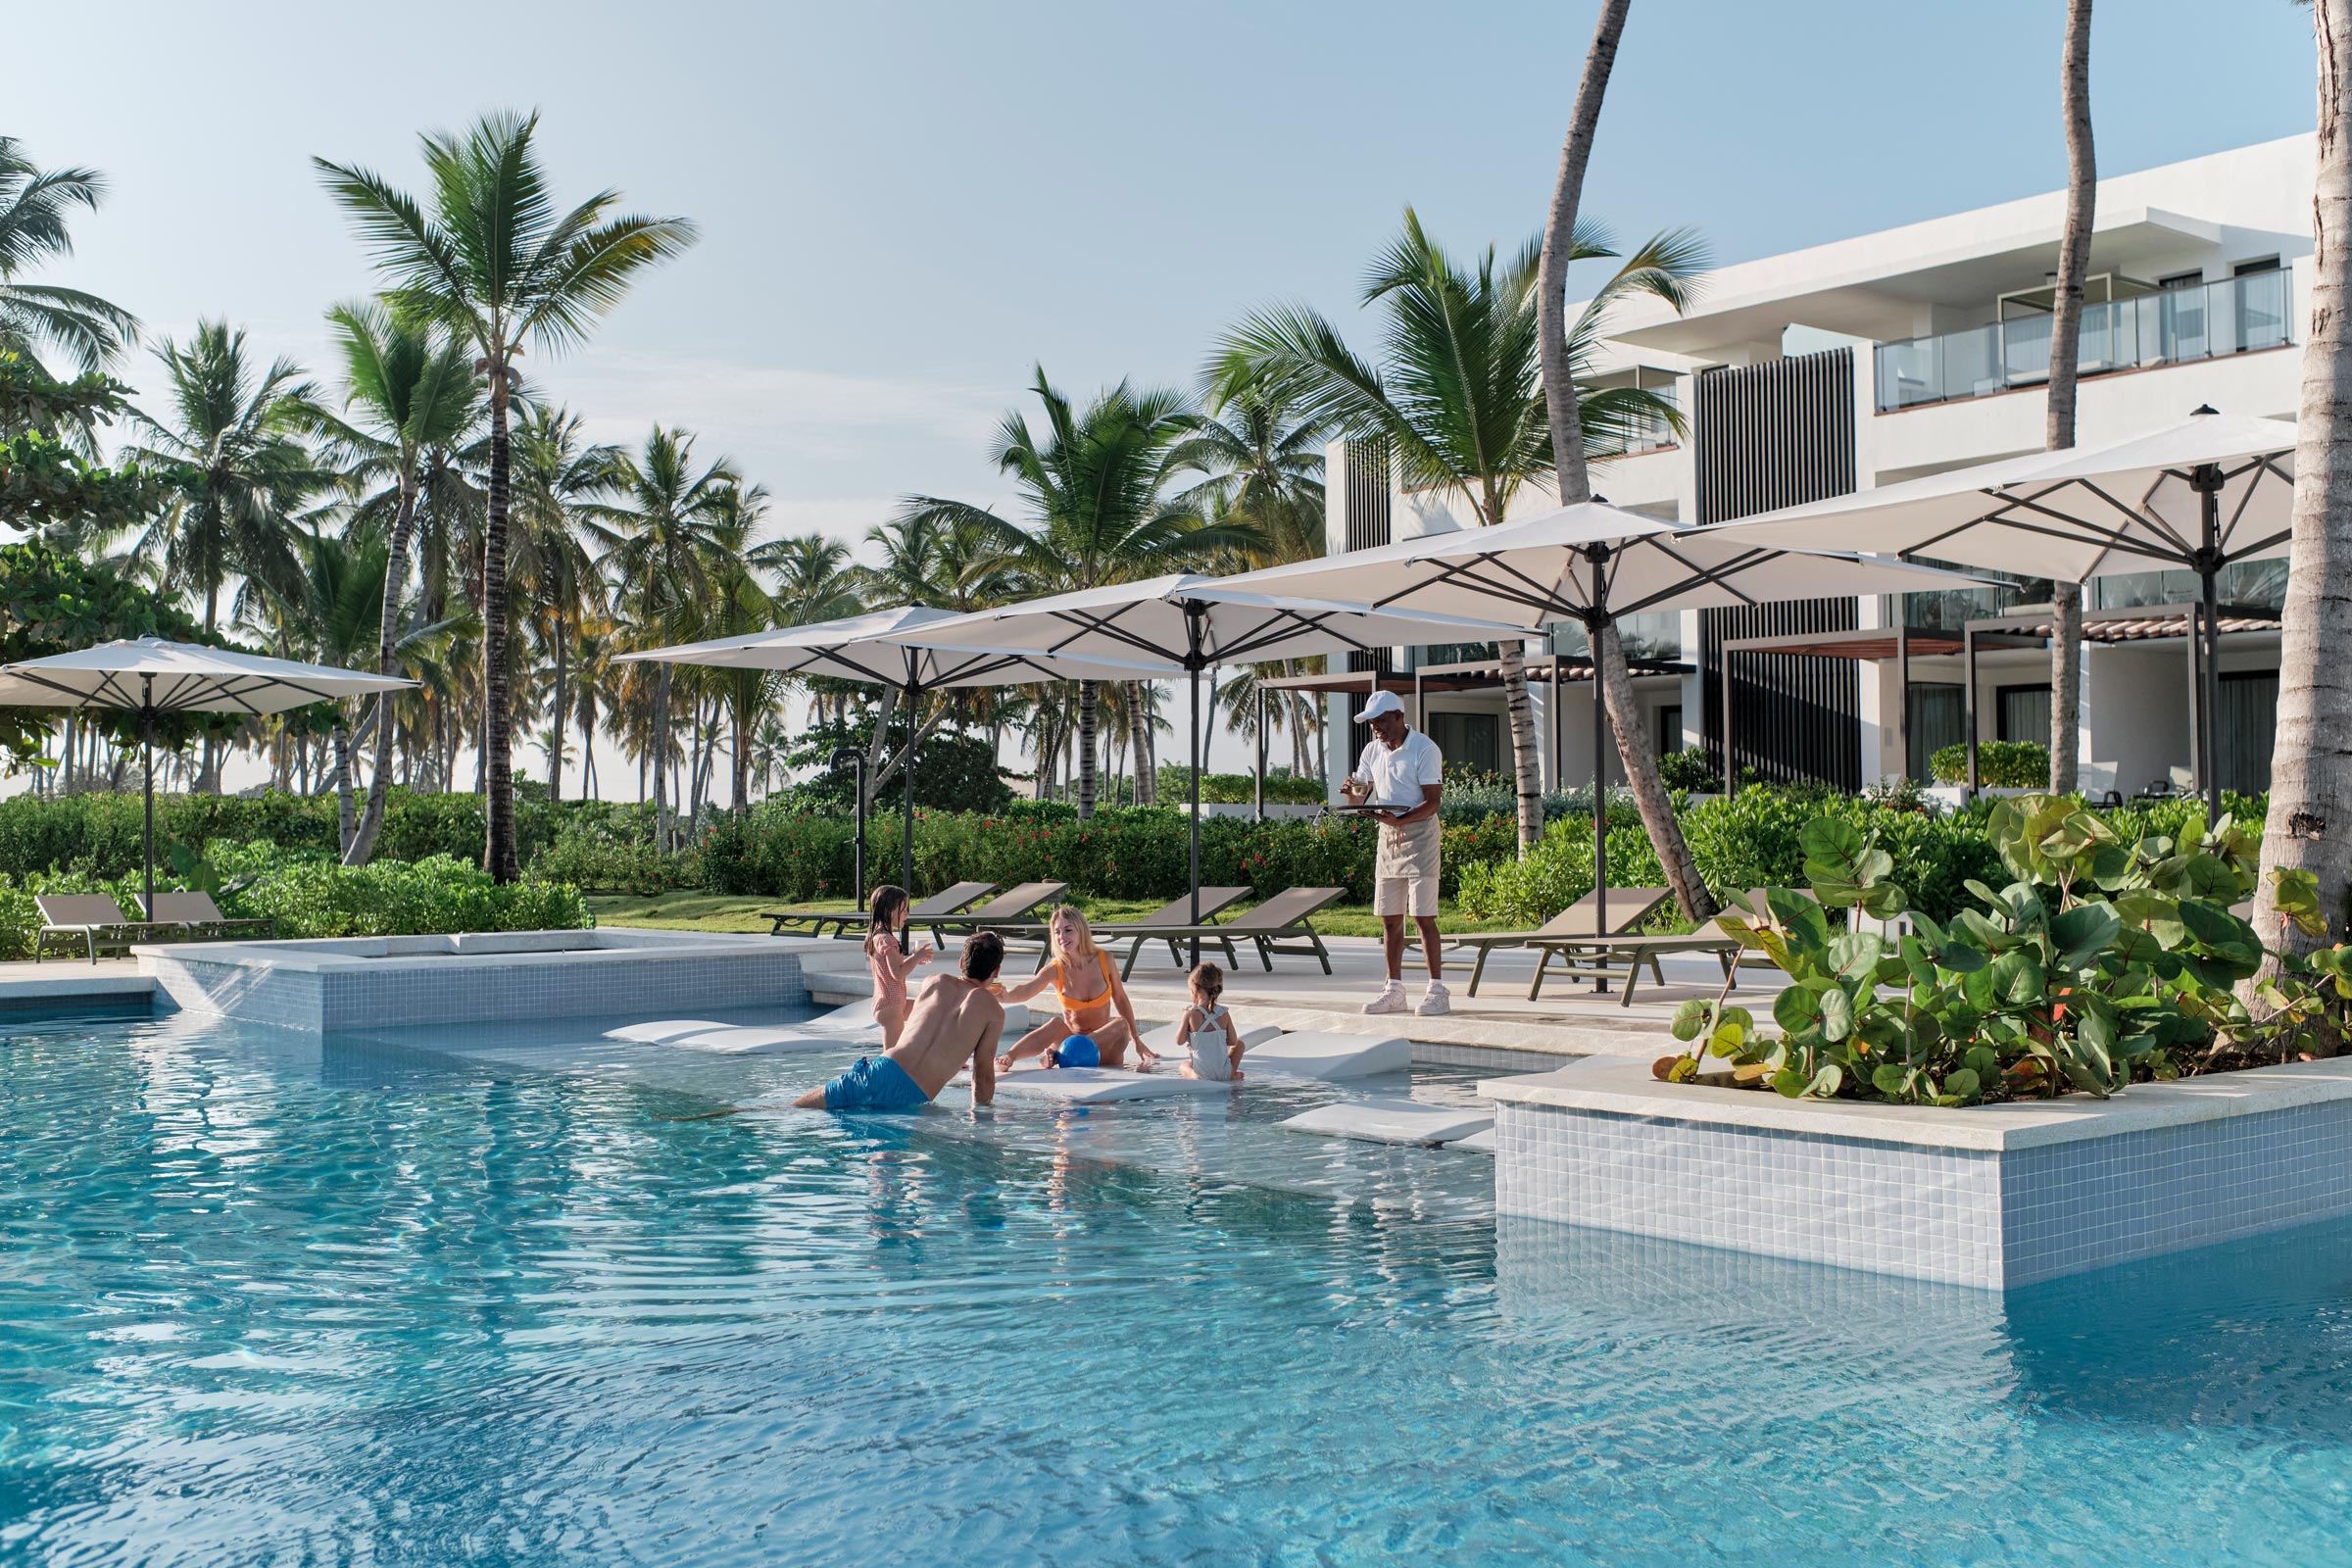 Enjoy our Finest Club Pool Bespoke Service at Finest Punta Cana